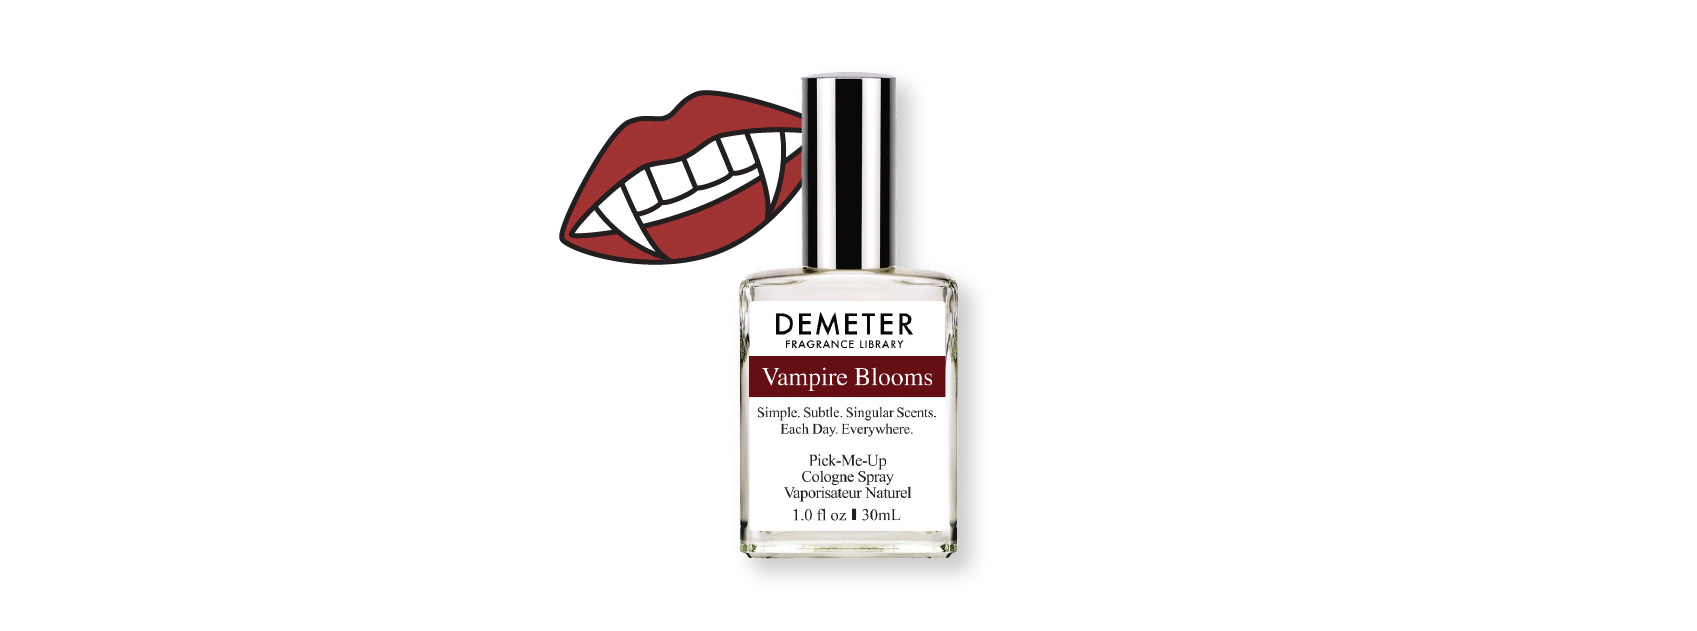 bottle of vampire blooms by demeter with a illustration of vampire fangs